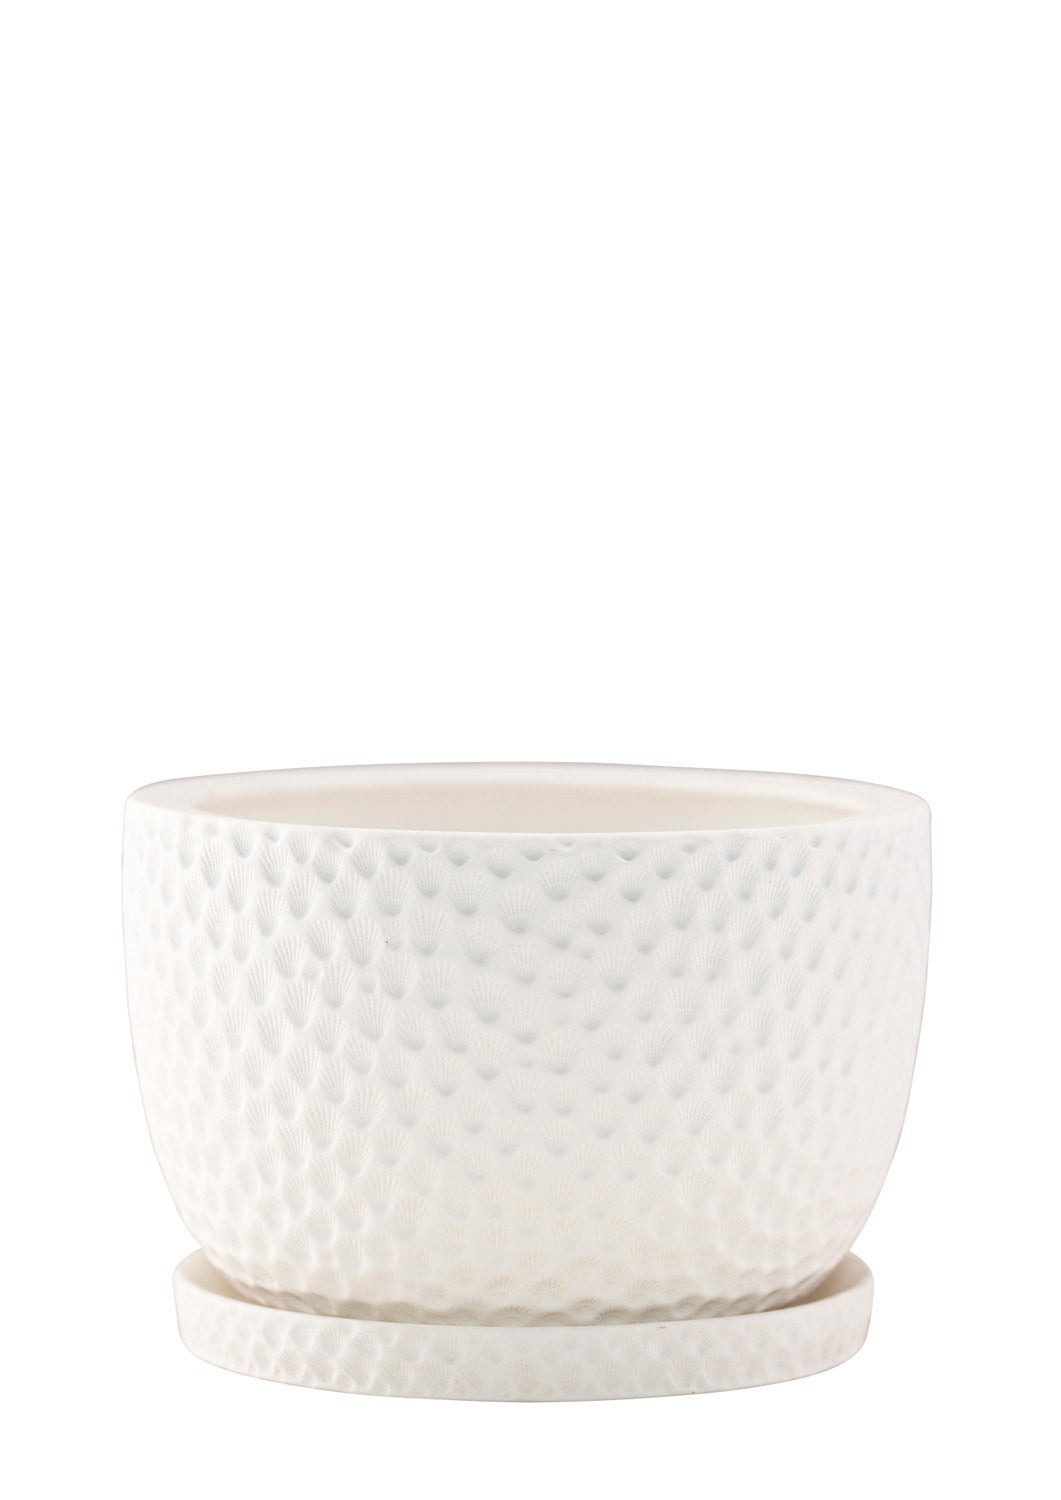 Embossed Plant Pot - Angus and Celeste Pots angus and Celeste 